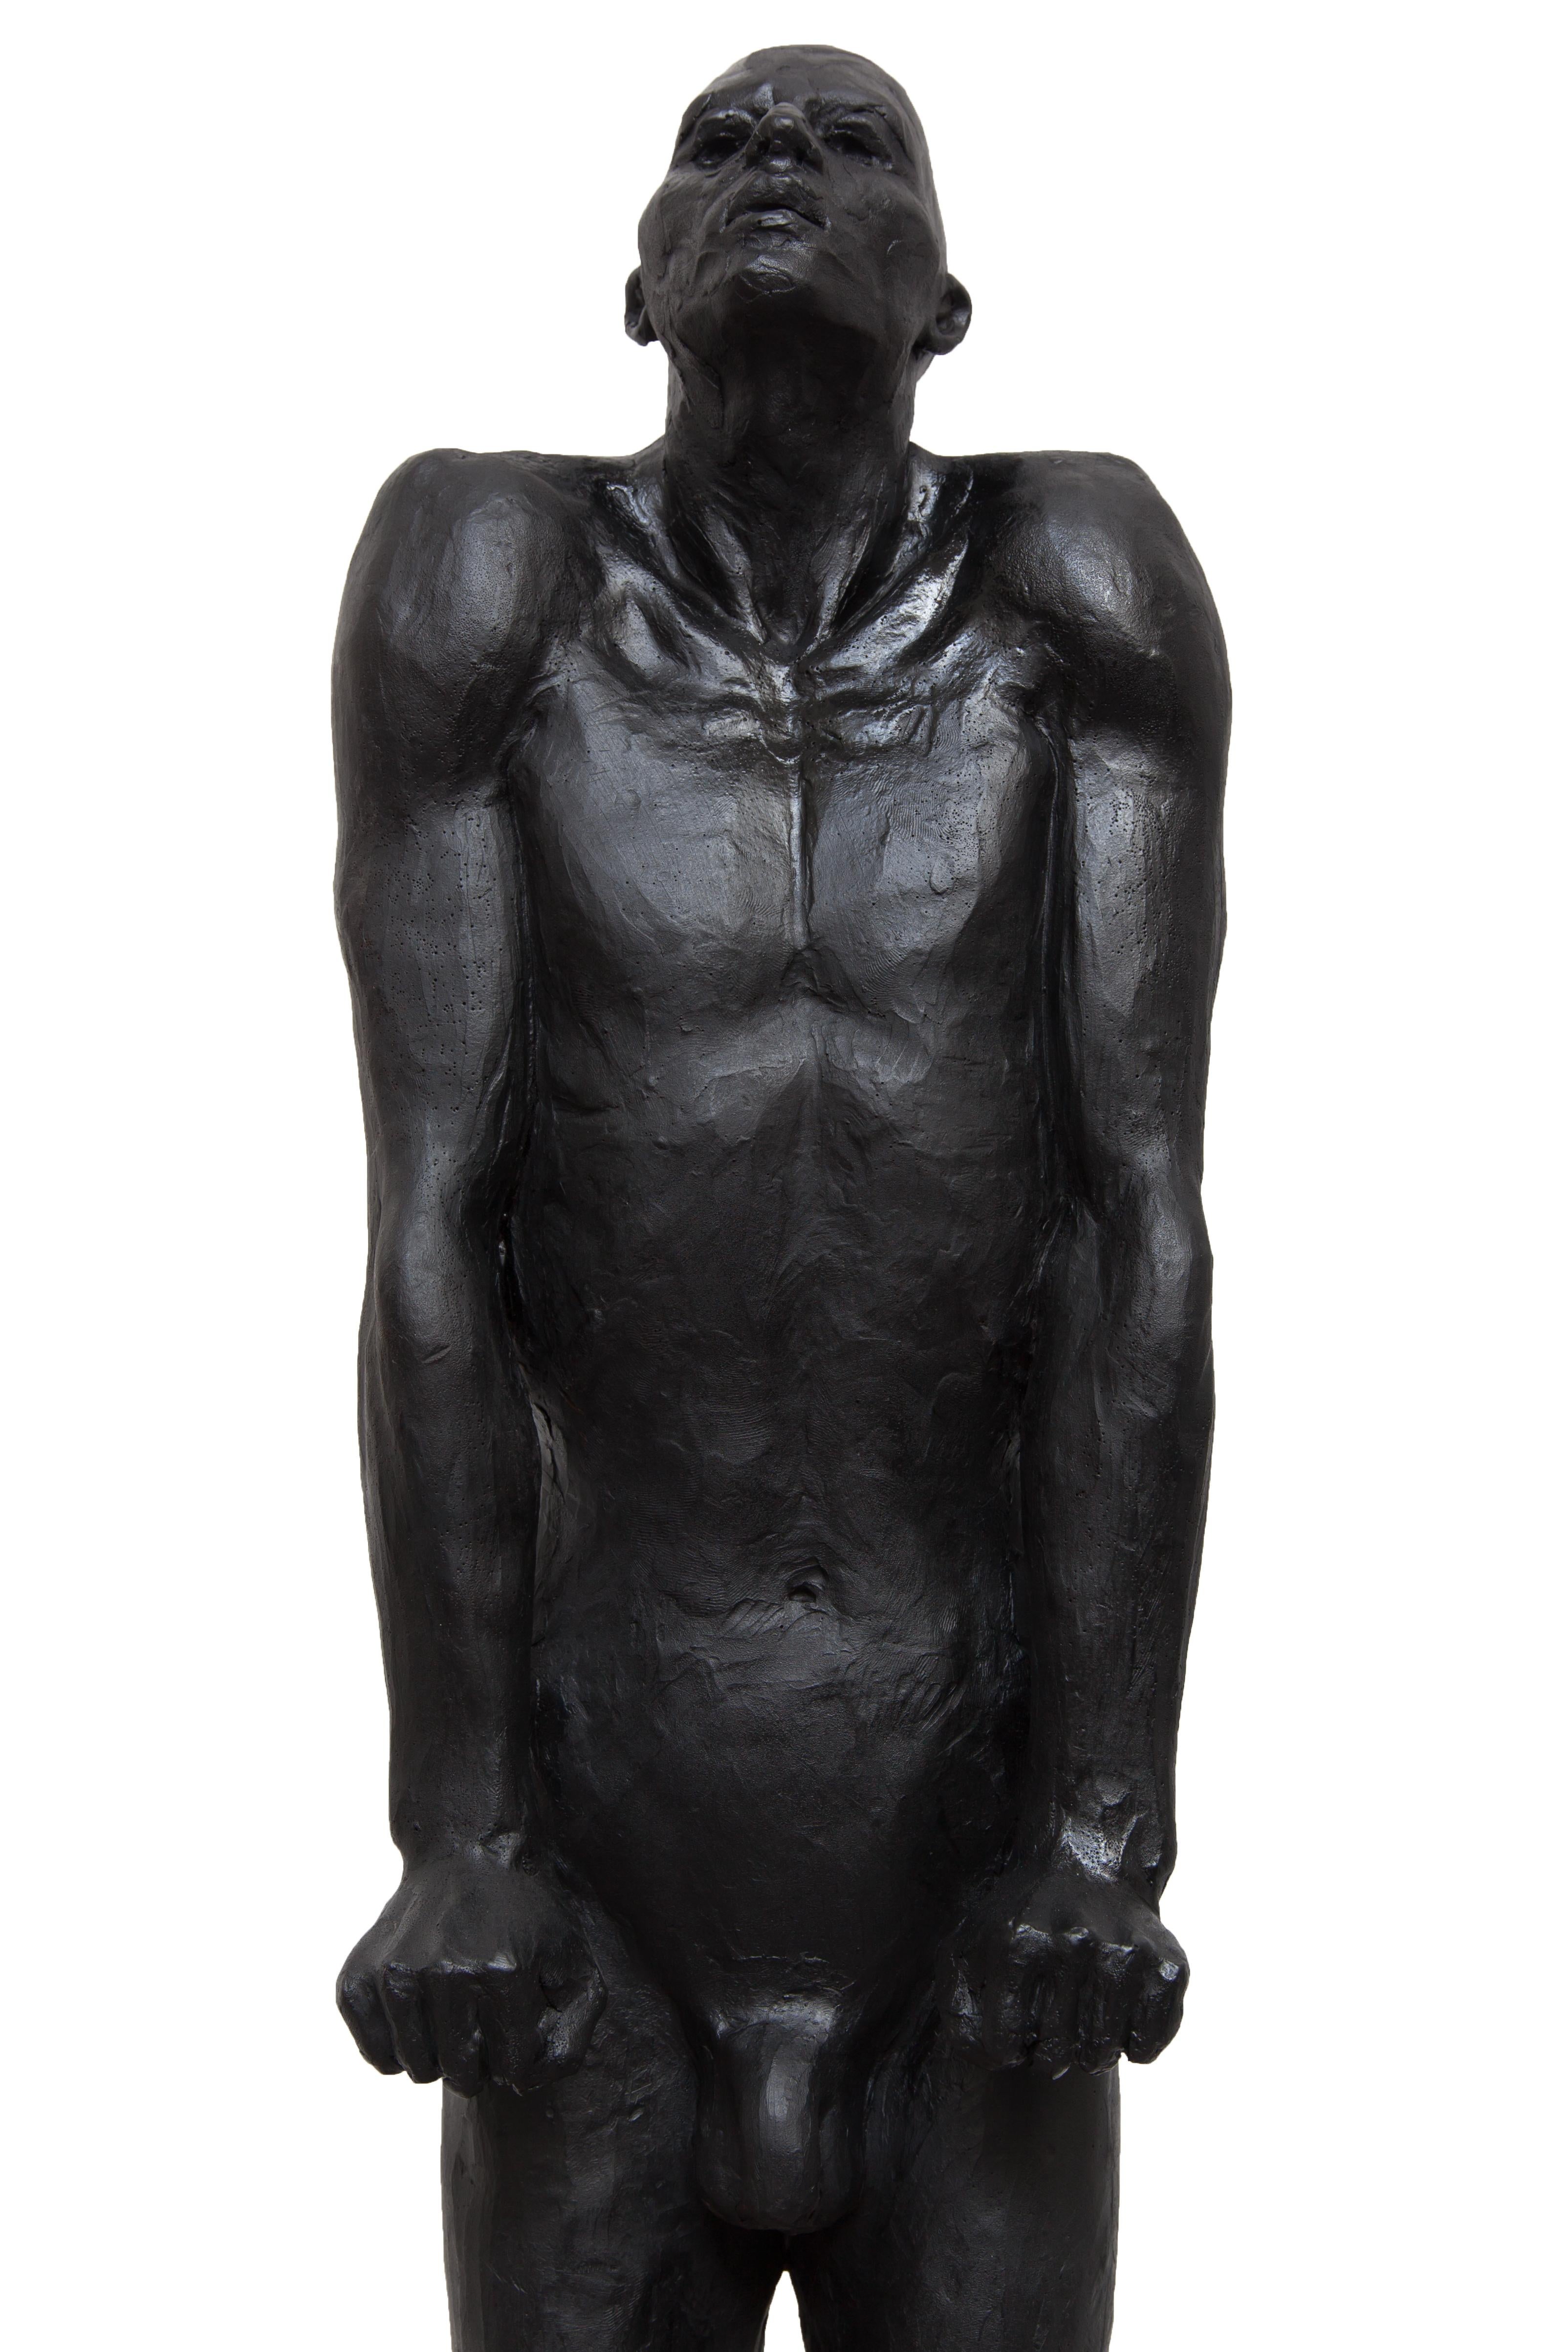 Bronze on wooden base
Edition of 9 plus 2 artist's proofs

Artist Guy Haddon Grant is one of Britain’s most important young sculptors. His aesthetically fascinating works are inspired by natural organic forms and the human figure. With works made